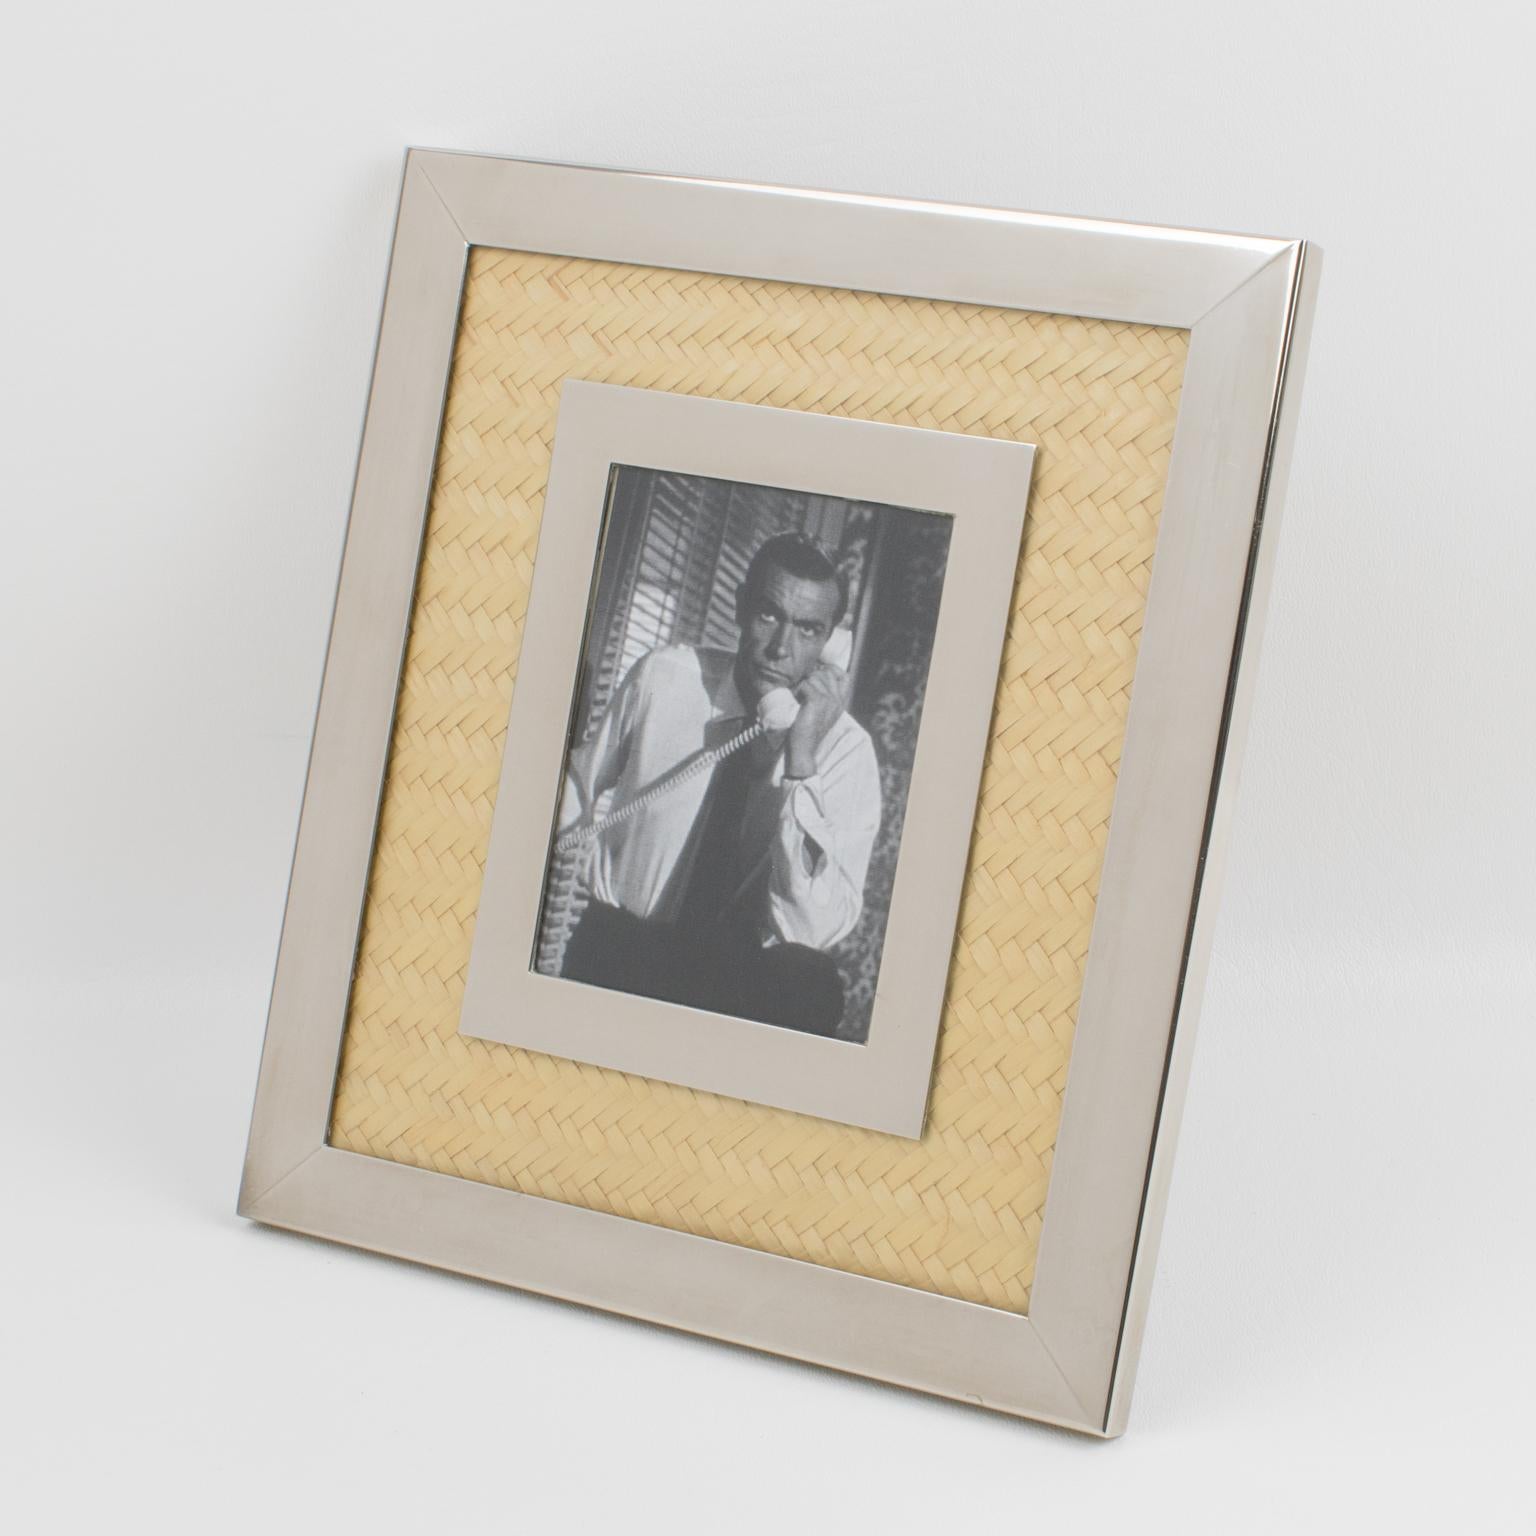 The company Umberto Mascagni, Italy, designed this elegant picture photo frame in the 1970s. The piece boasts chromed metal and straw marquetry combinations. The metal easel at the back has a rotating system that allows the frame to be placed in a